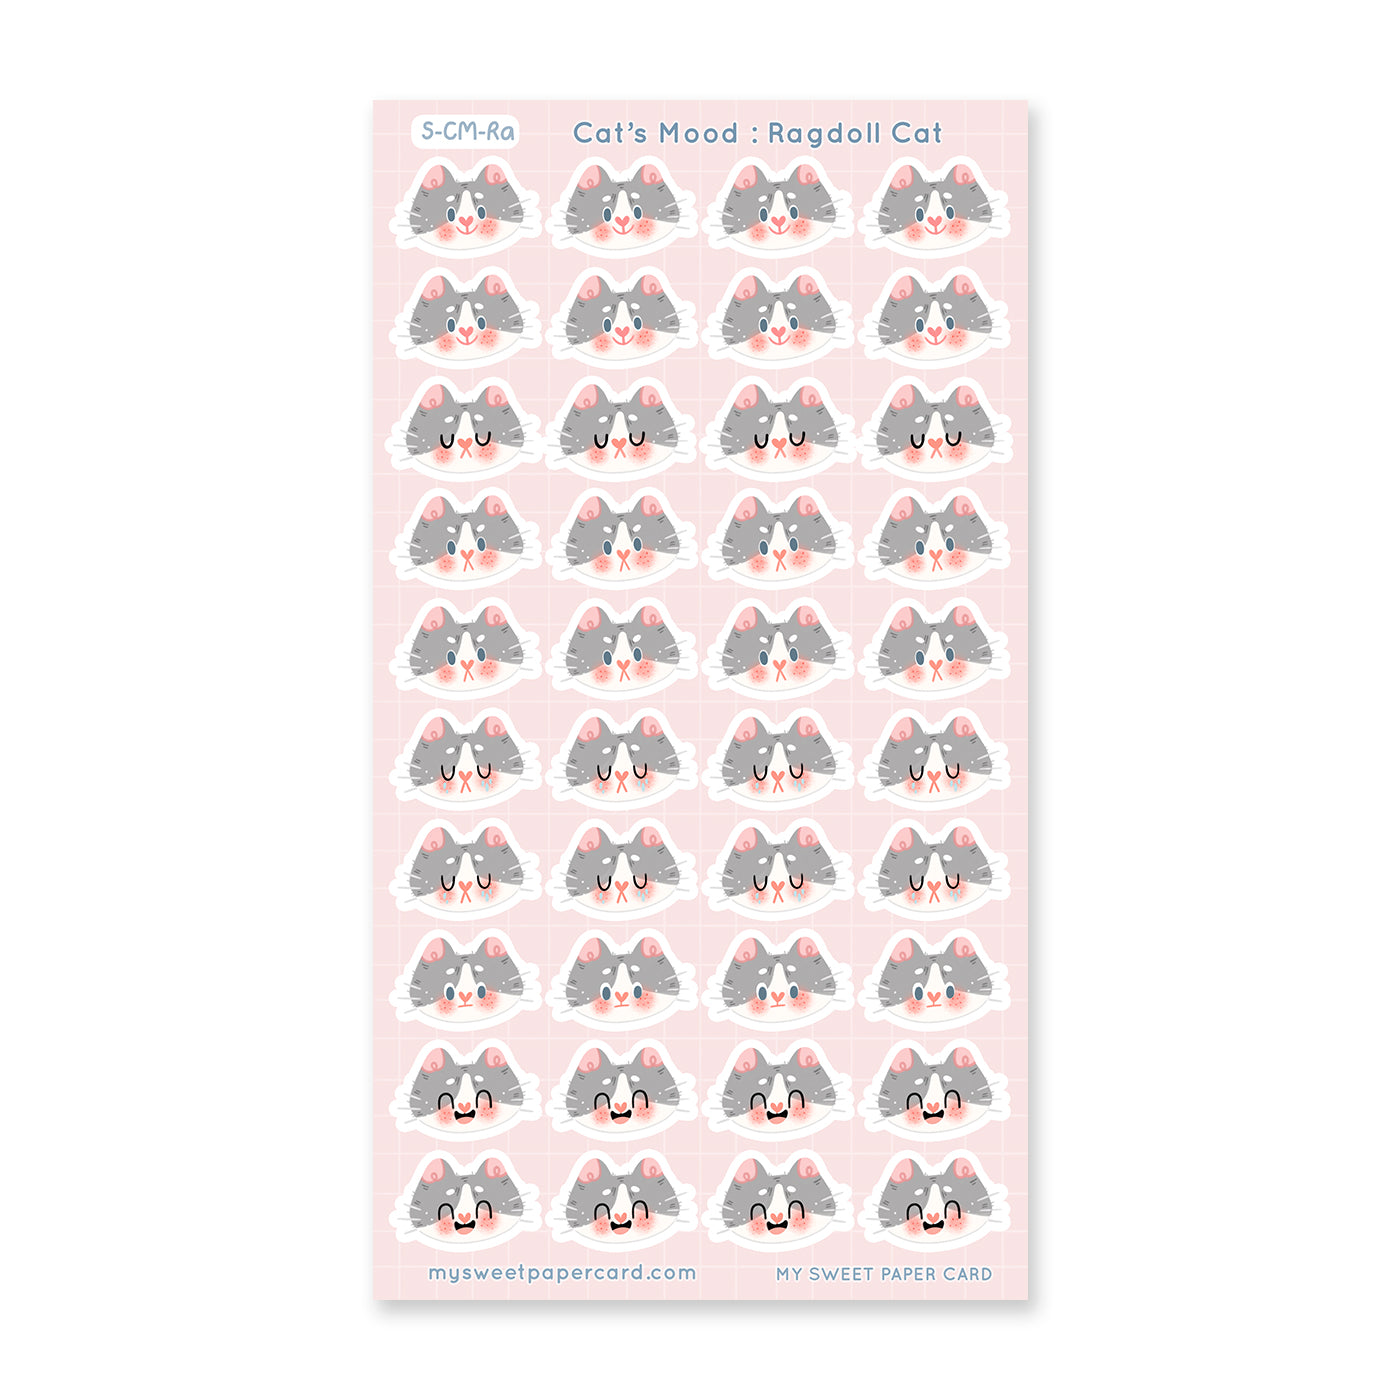 ragdoll cat stickers sheet with different moods